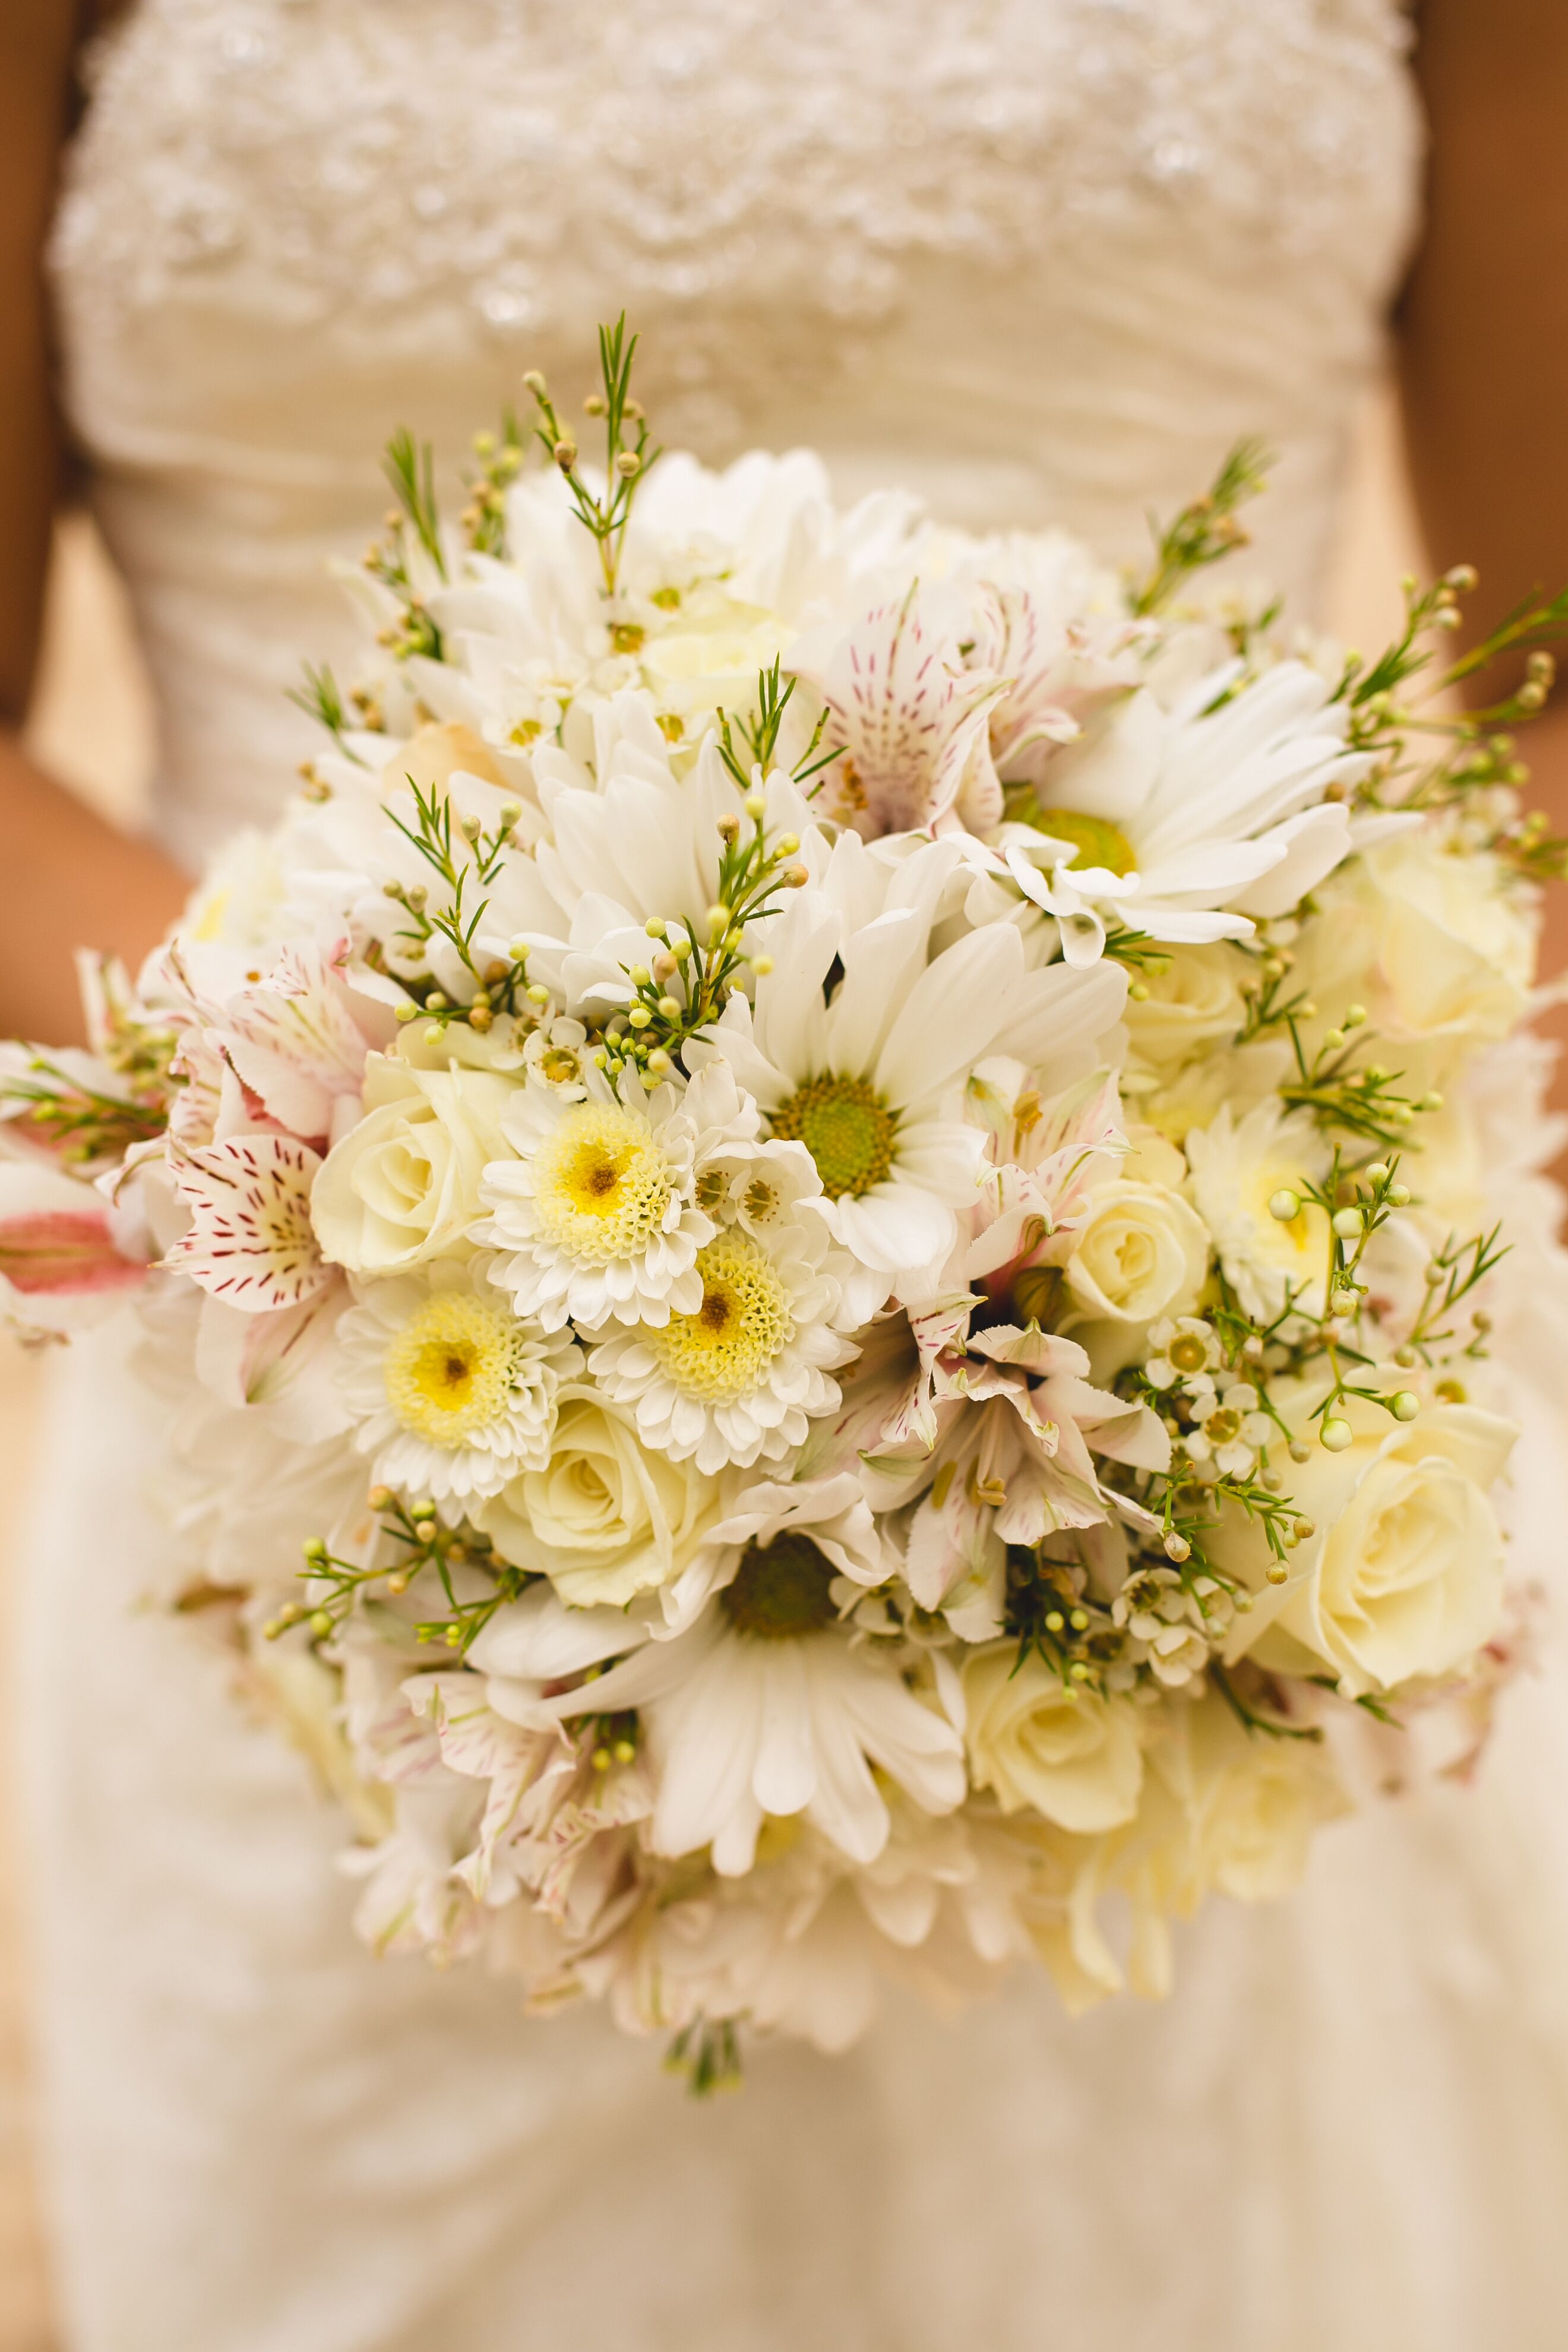 White Daisy, Rose and Tiger Lily Bouquet